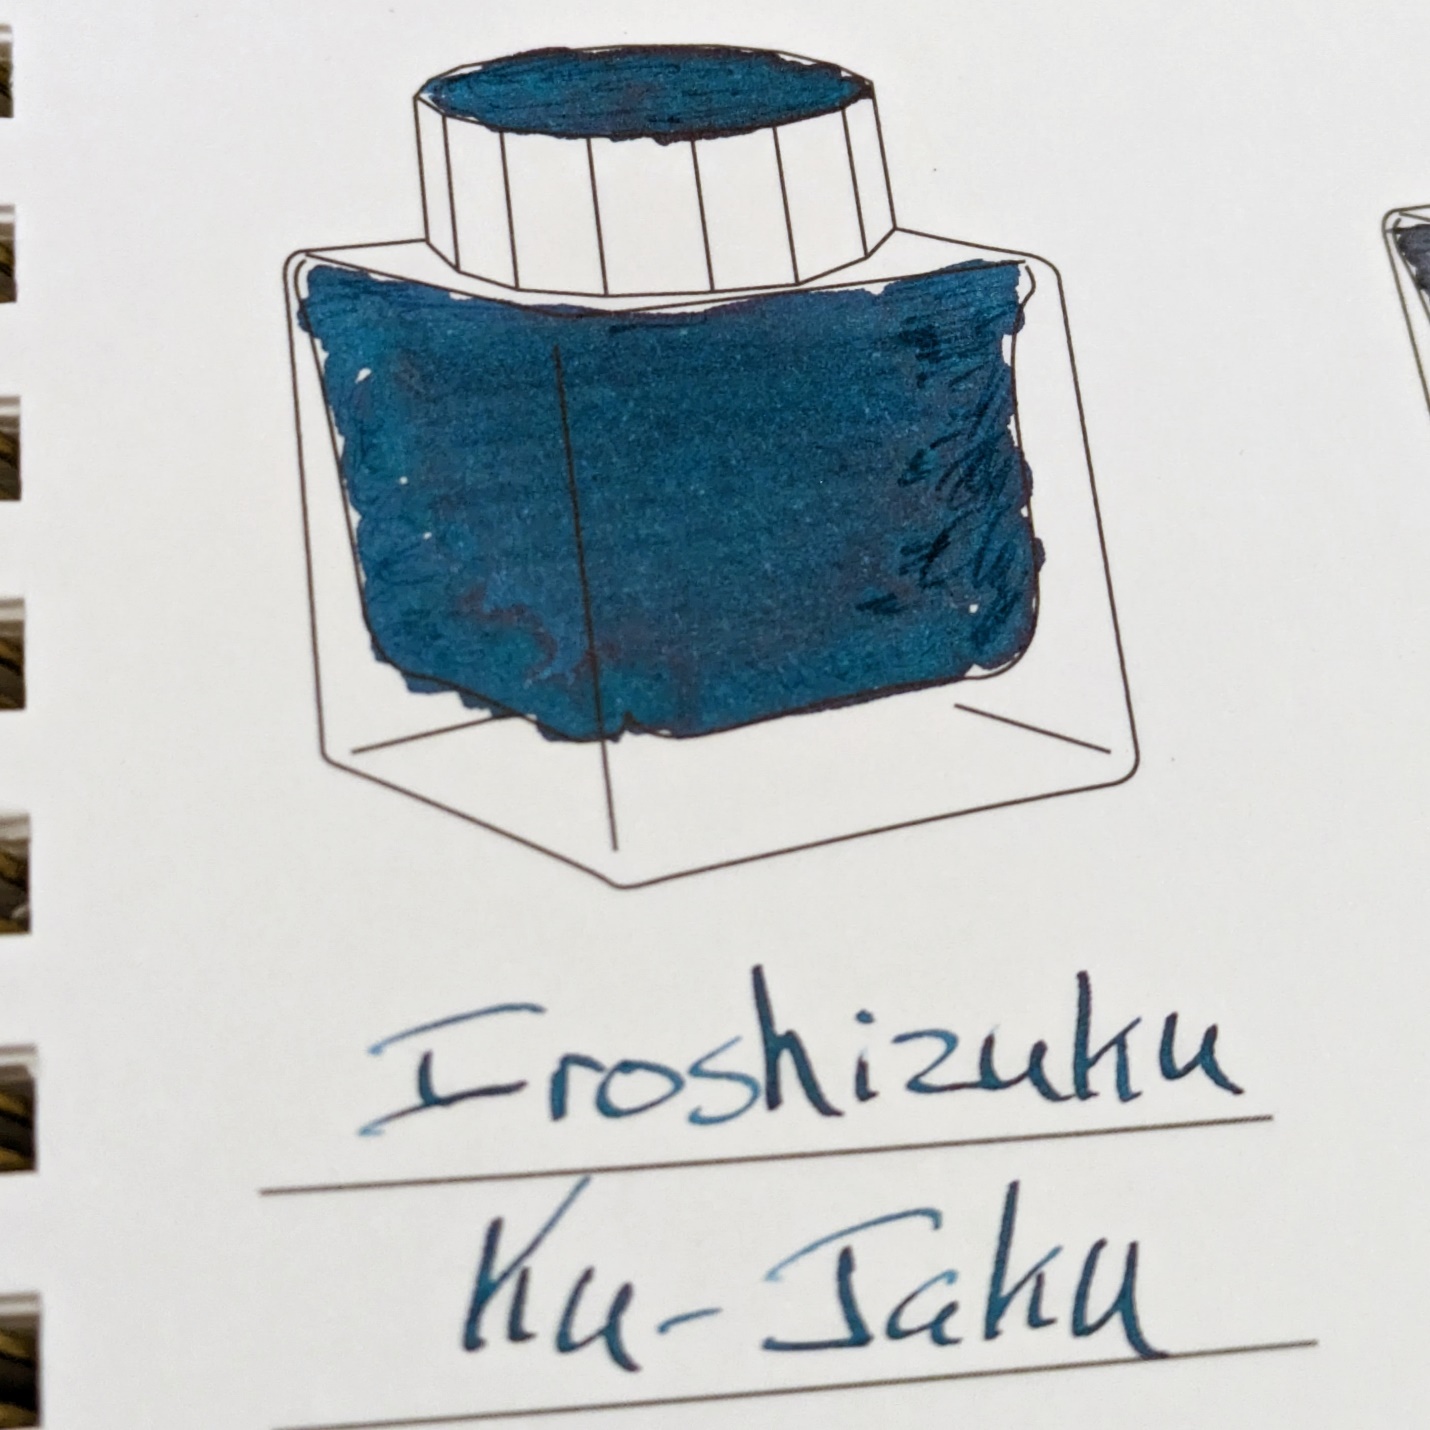 This was the first Iroshizuku ink I tried years ago, still one of my favorites. 